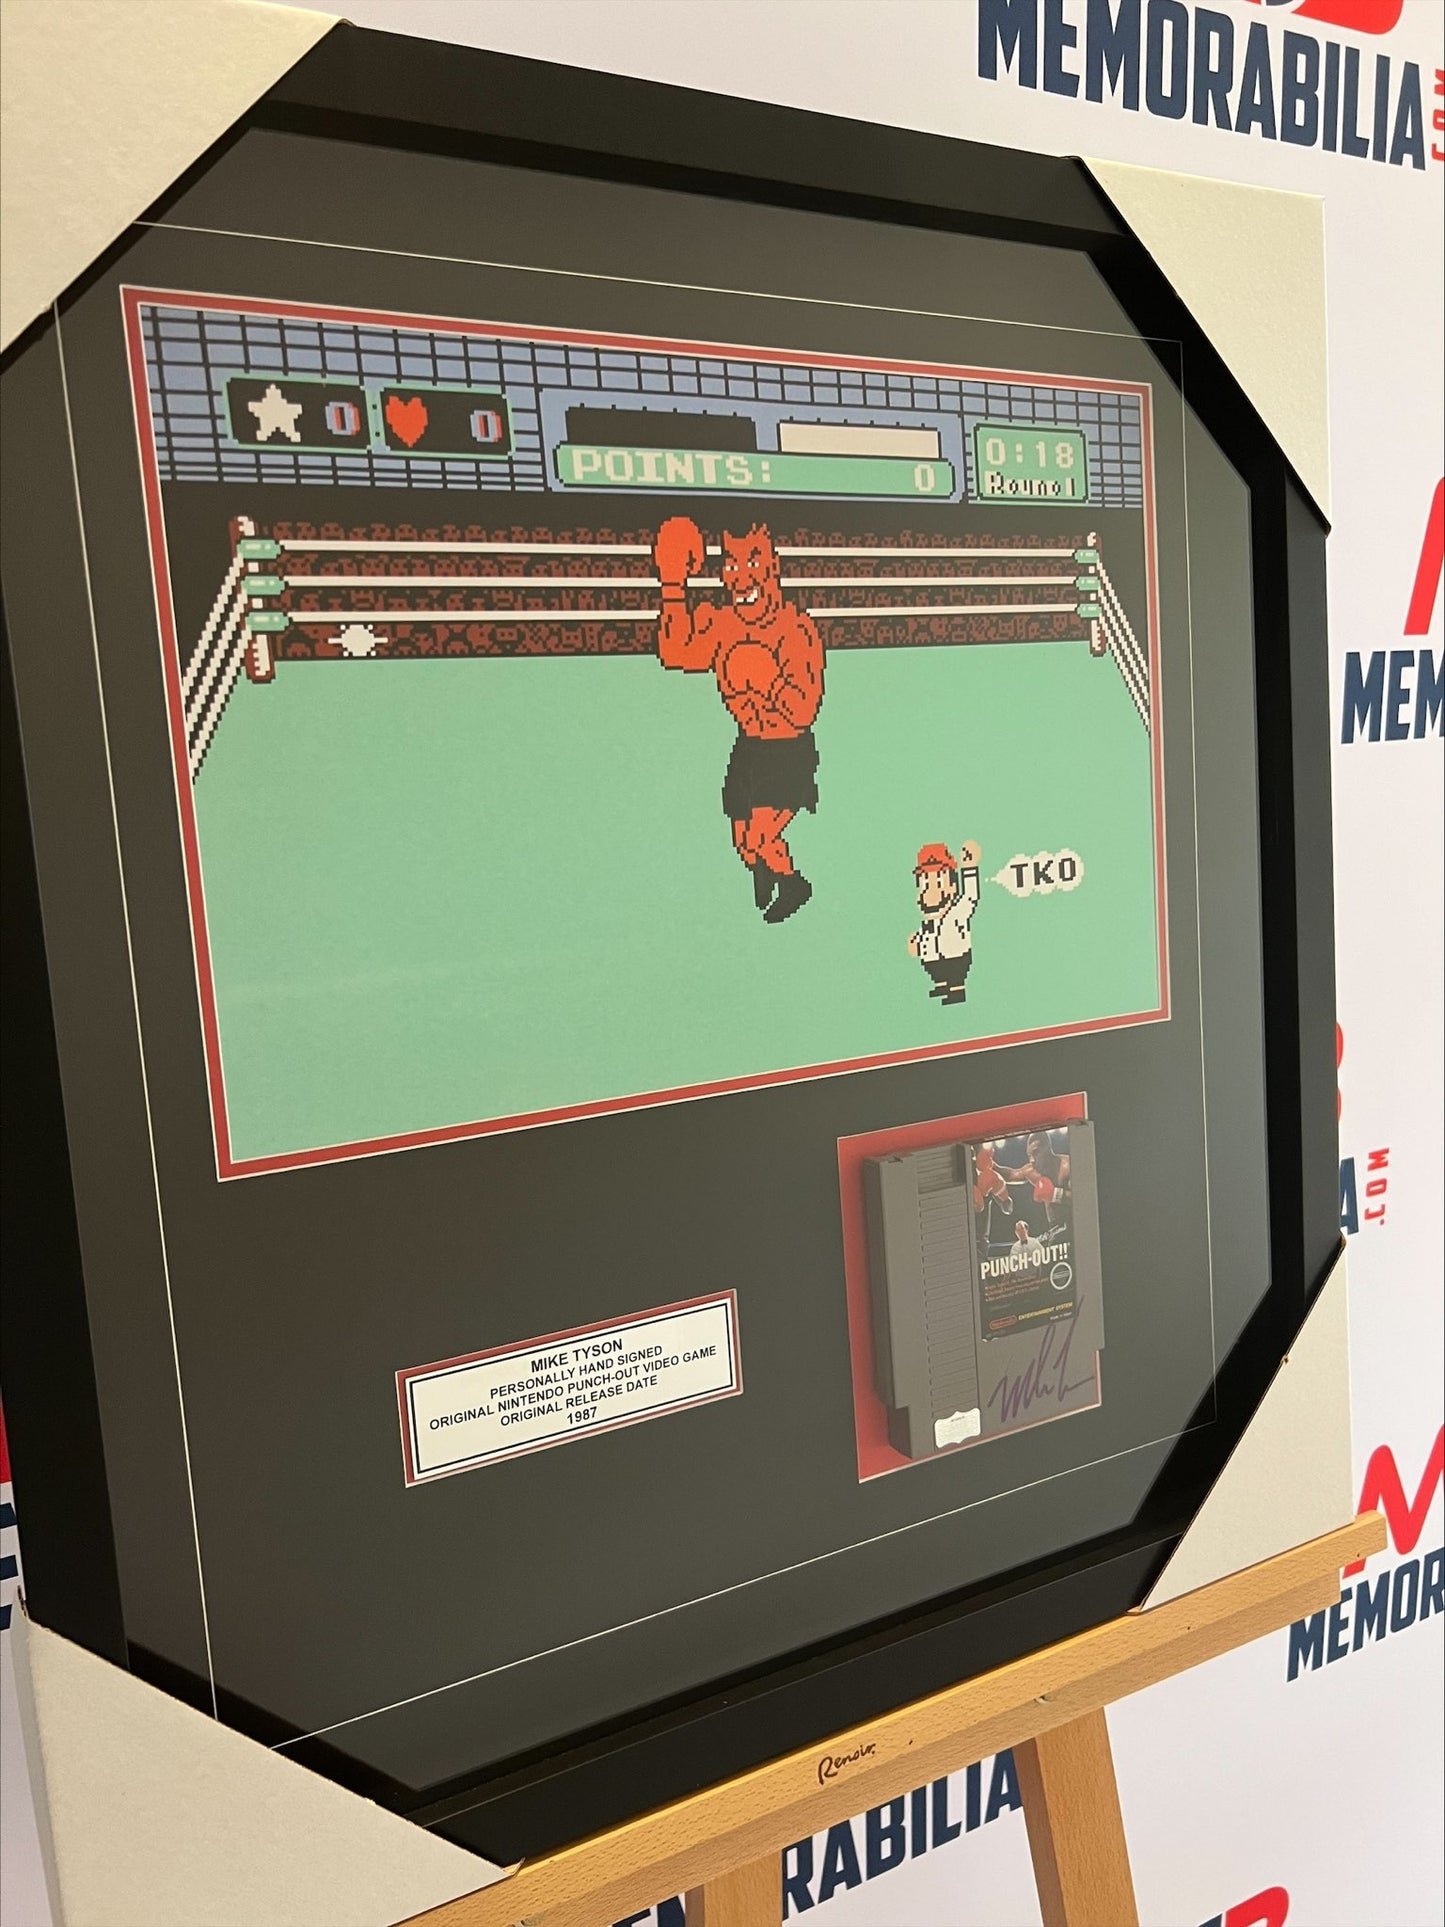 Mike Tyson Signed Original 1987 Punch Out Video Game Cartridge